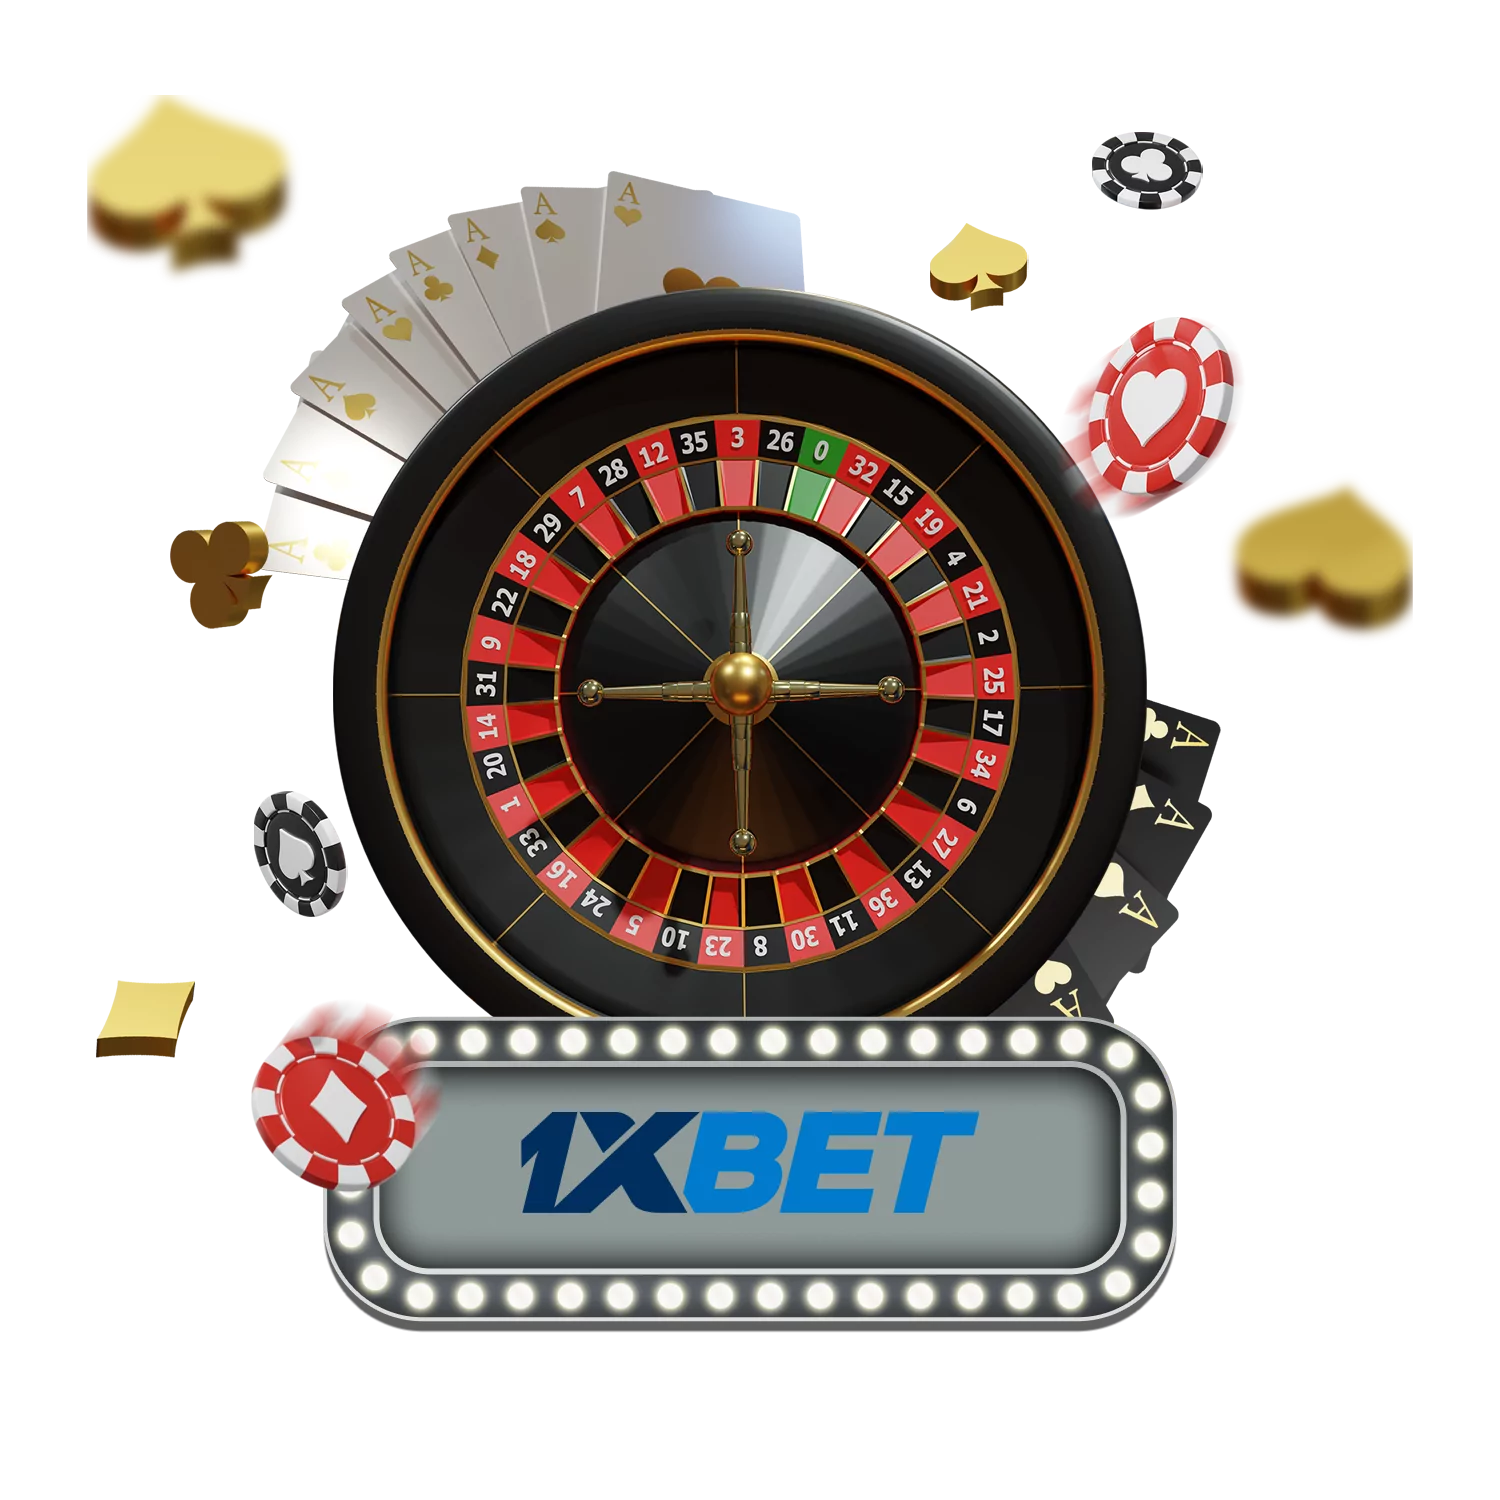 Gambling addiction is a severe problem for some users of bookmakers offices' sites.